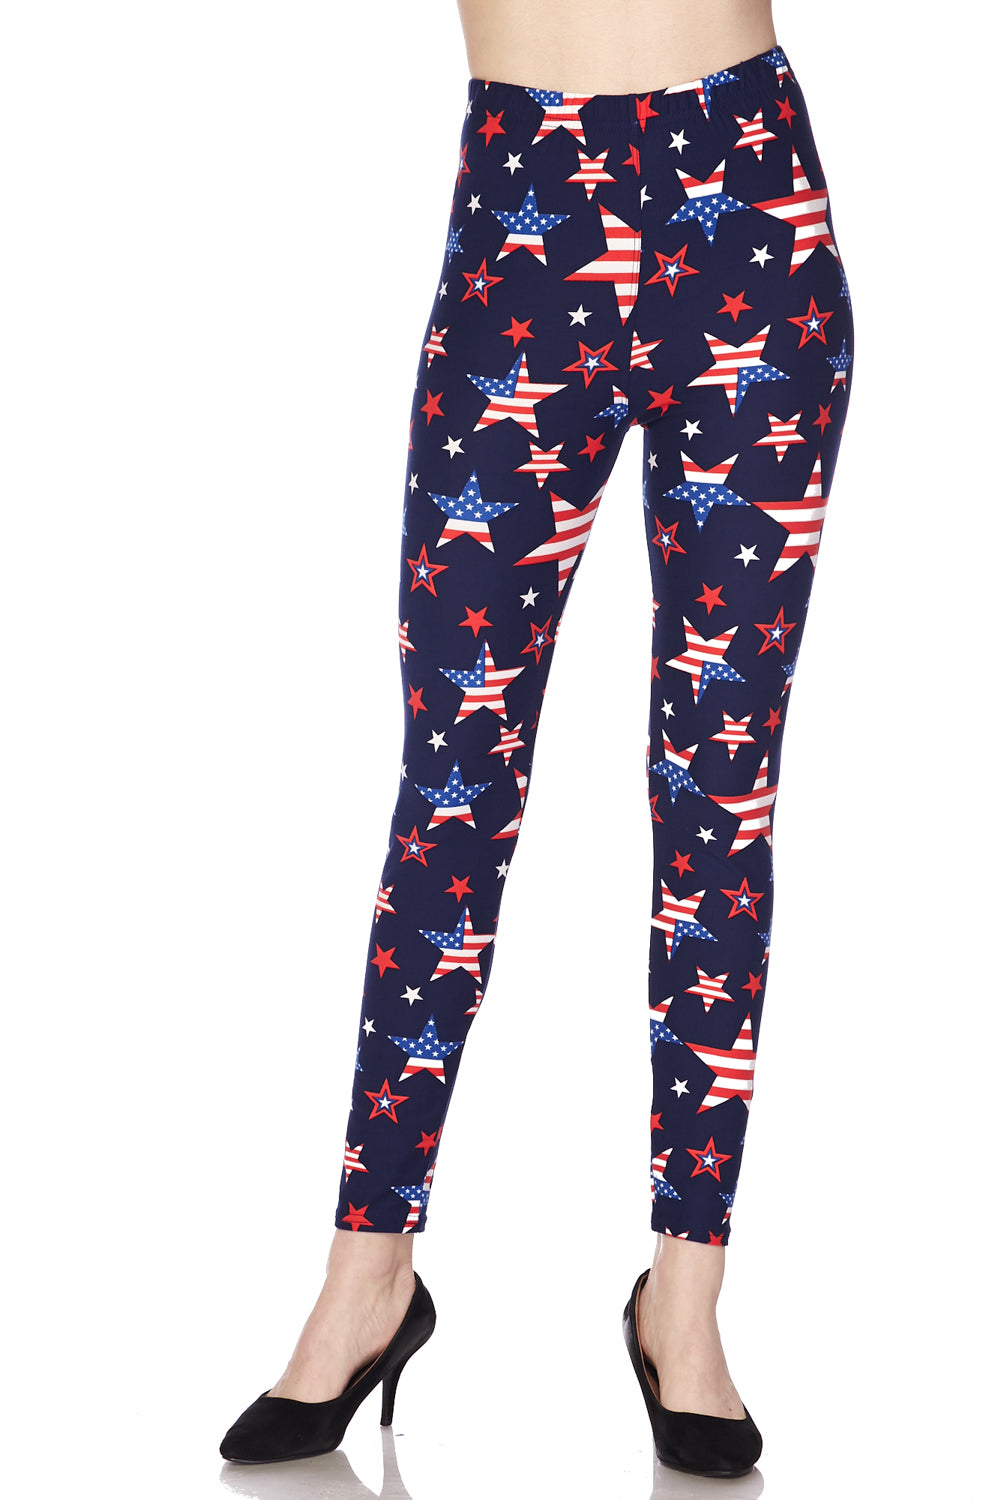 APEXFWDT Women's Casual 4th of July Leggings American Flag Print Stretchy  Yoga Pants Comfy High Waist Fitness Running Gym Active Pants - Walmart.com